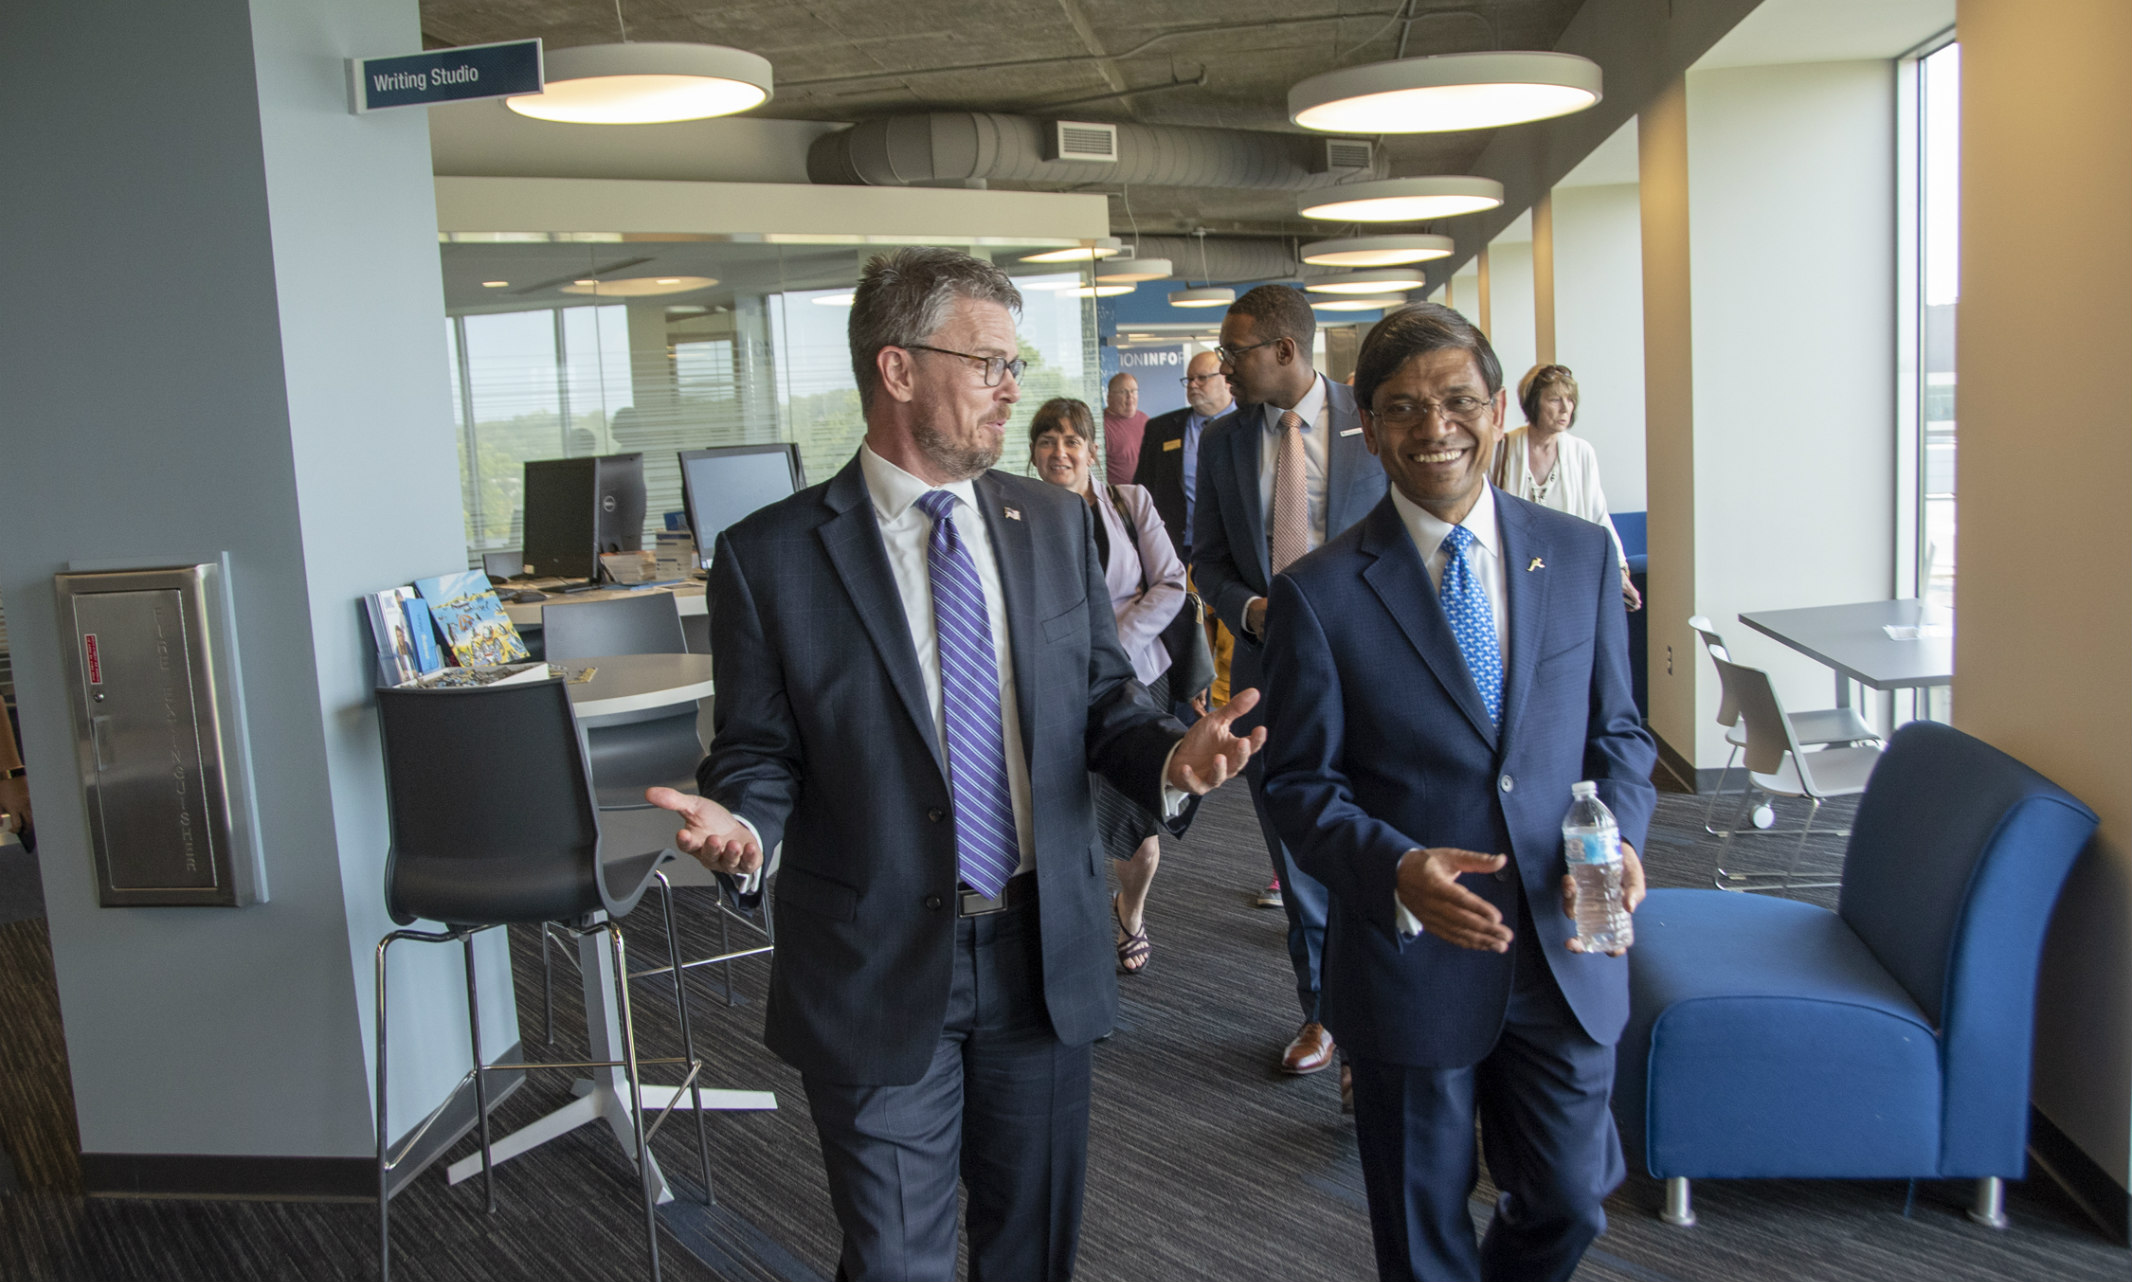 Johnny Collett, assistant secretary of education, walks down a hallway with UMKC Chancellor Mauli Agrawal.